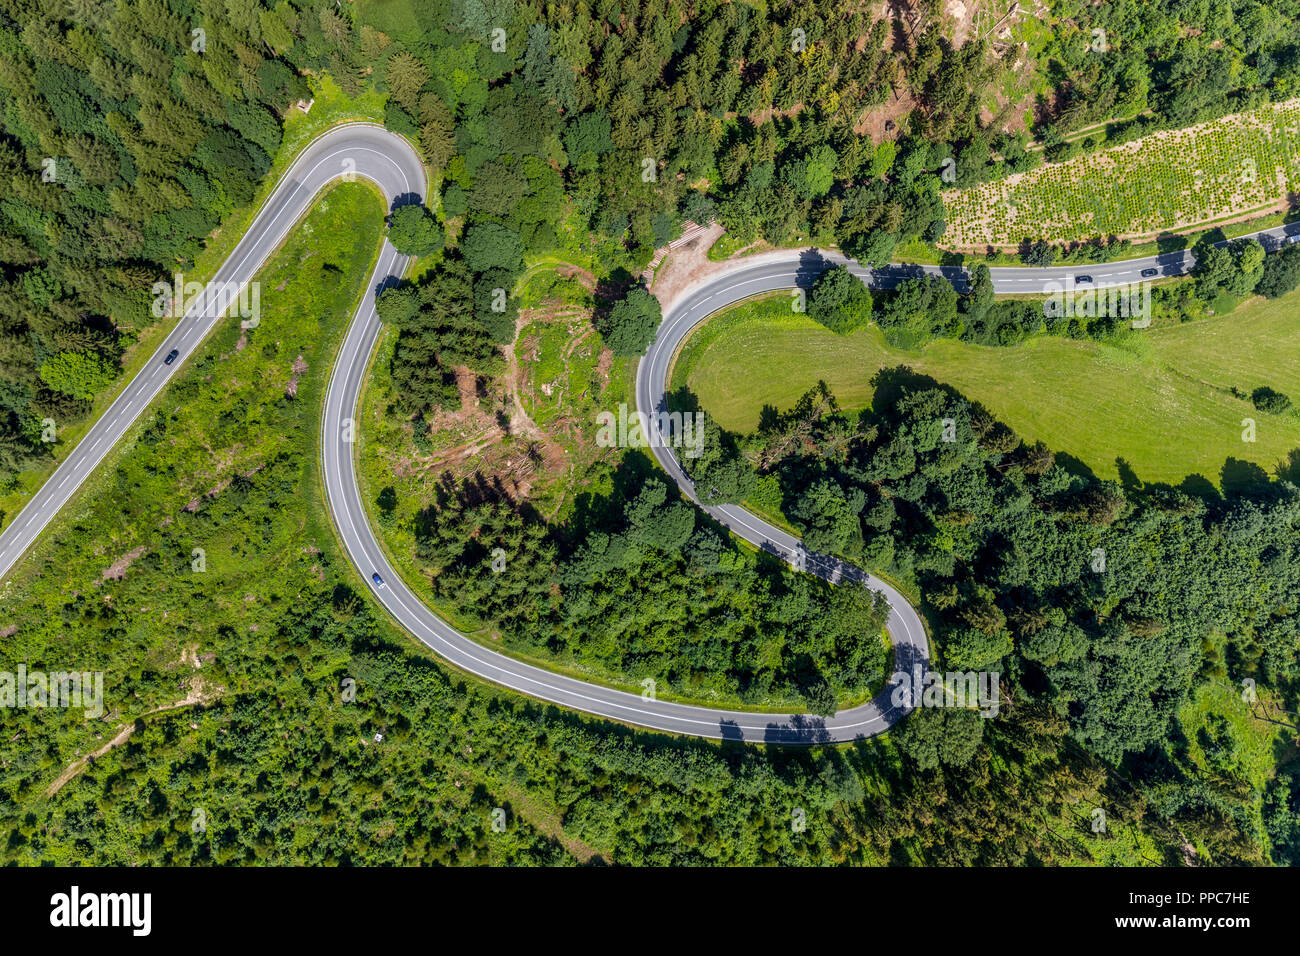 Aerial view, Winding road with hairpin bends, Am Bilstein, Highway L870, Brilon, Sauerland, North Rhine-Westphalia, Germany Stock Photo